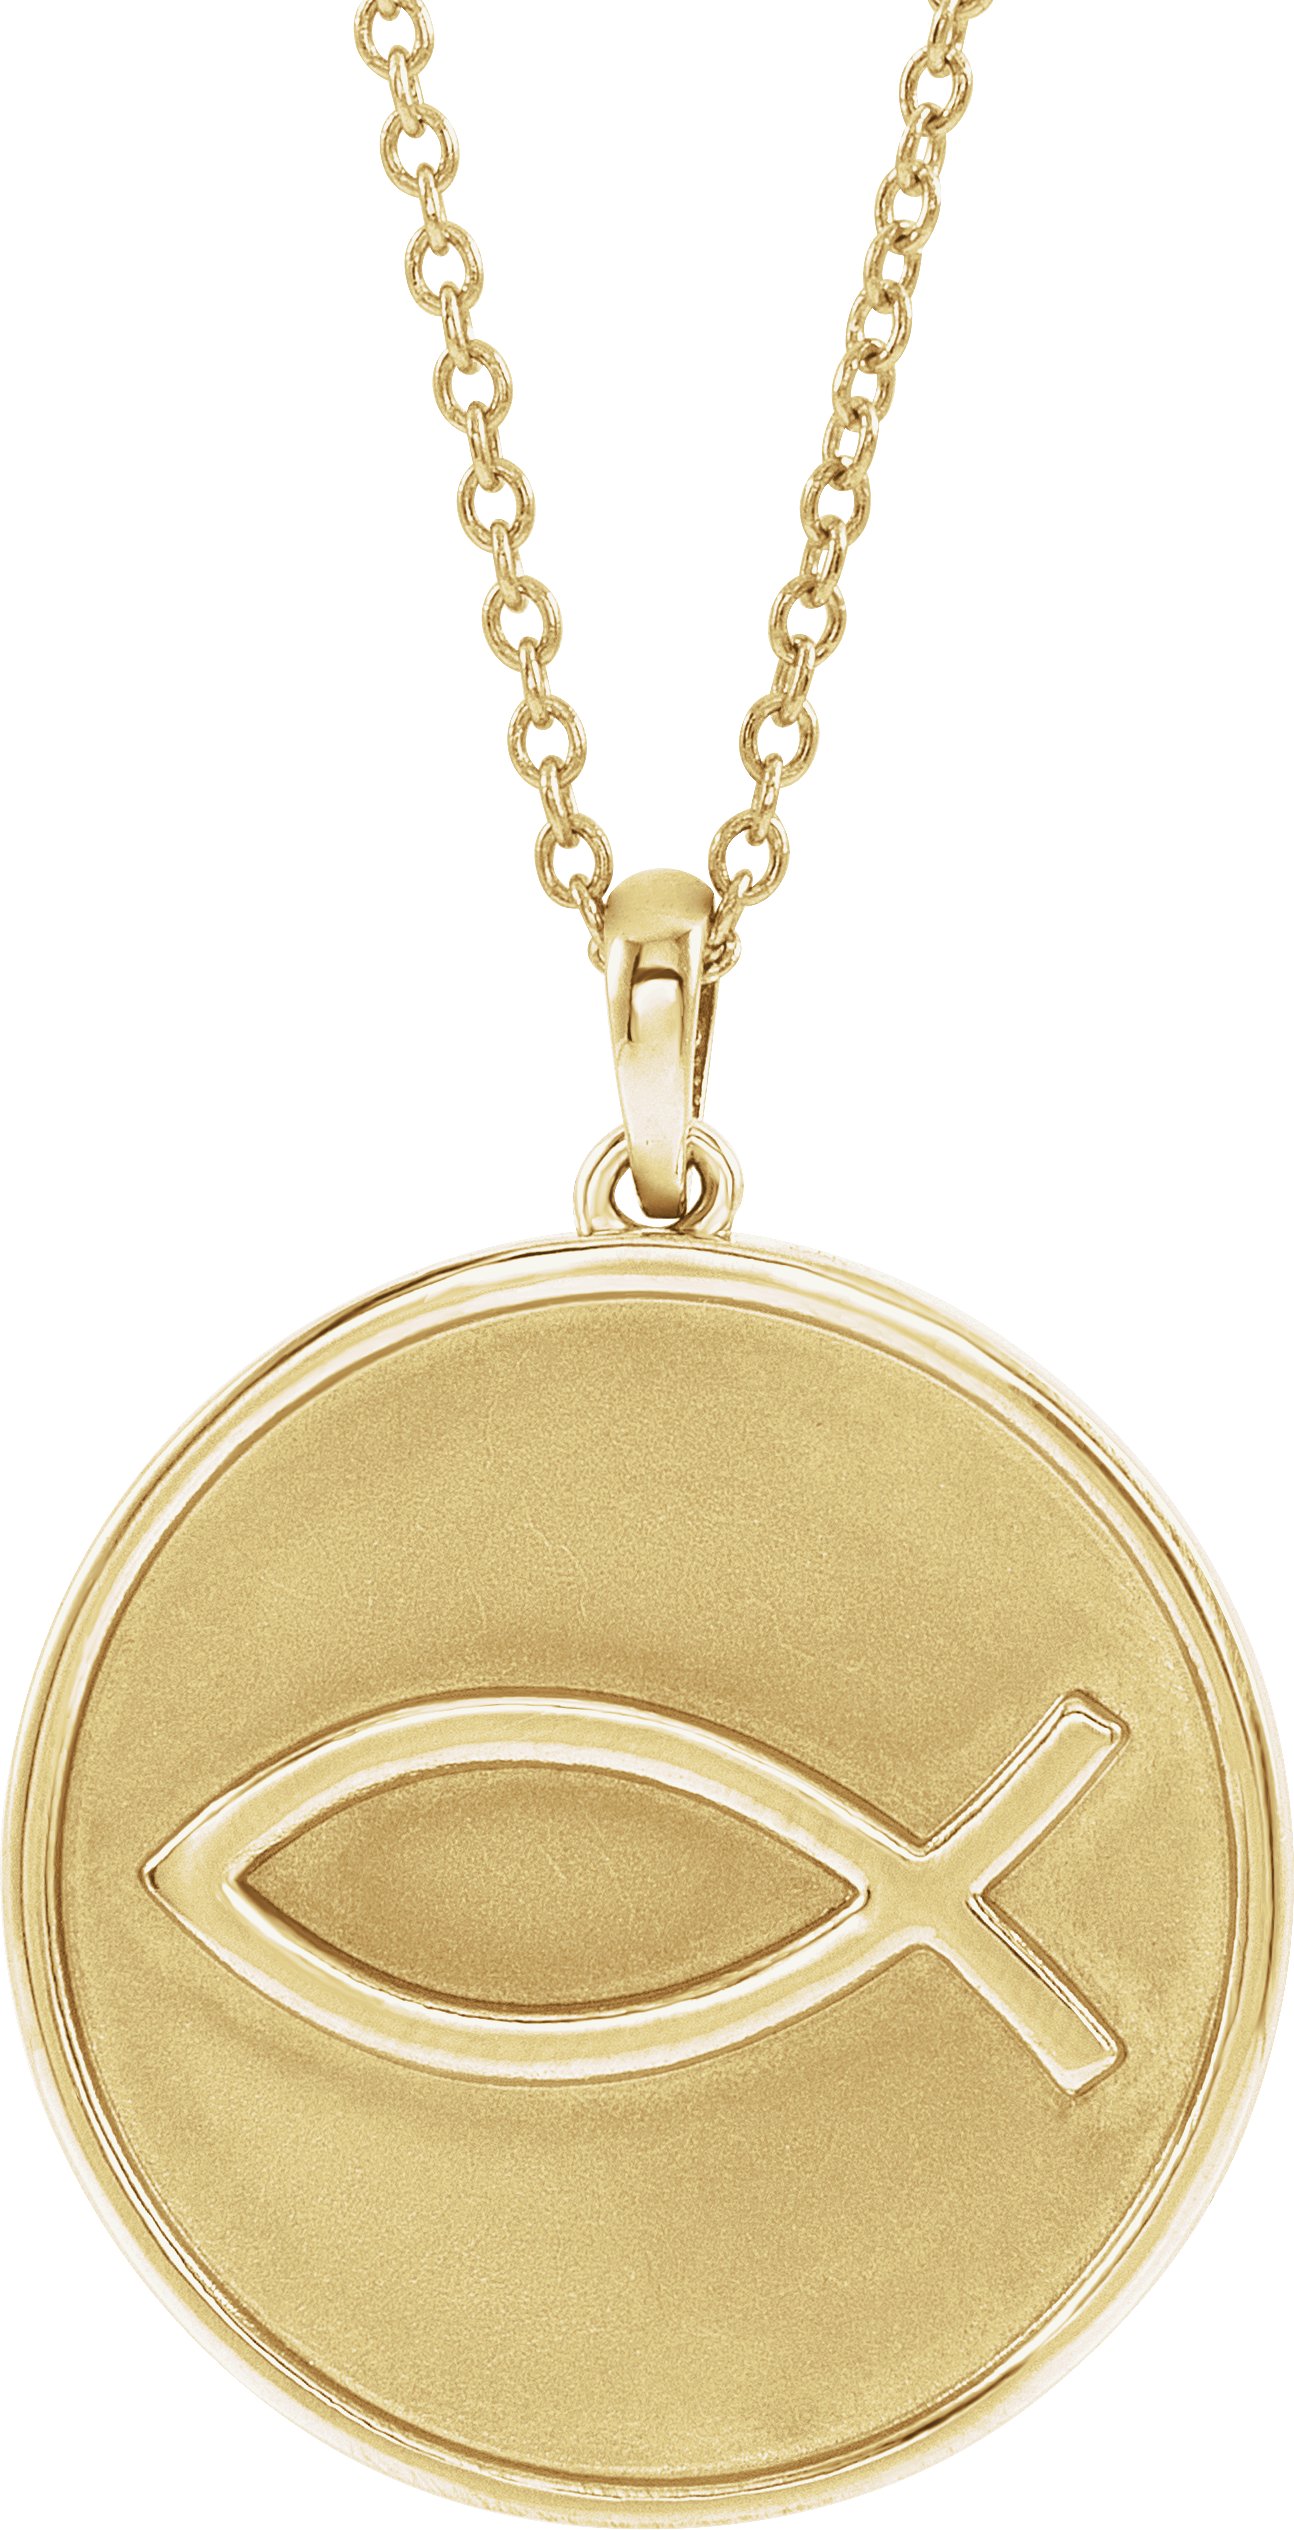 14K Yellow 20.3x18.4 mm Ichthus (Fish) 16-18" Necklace